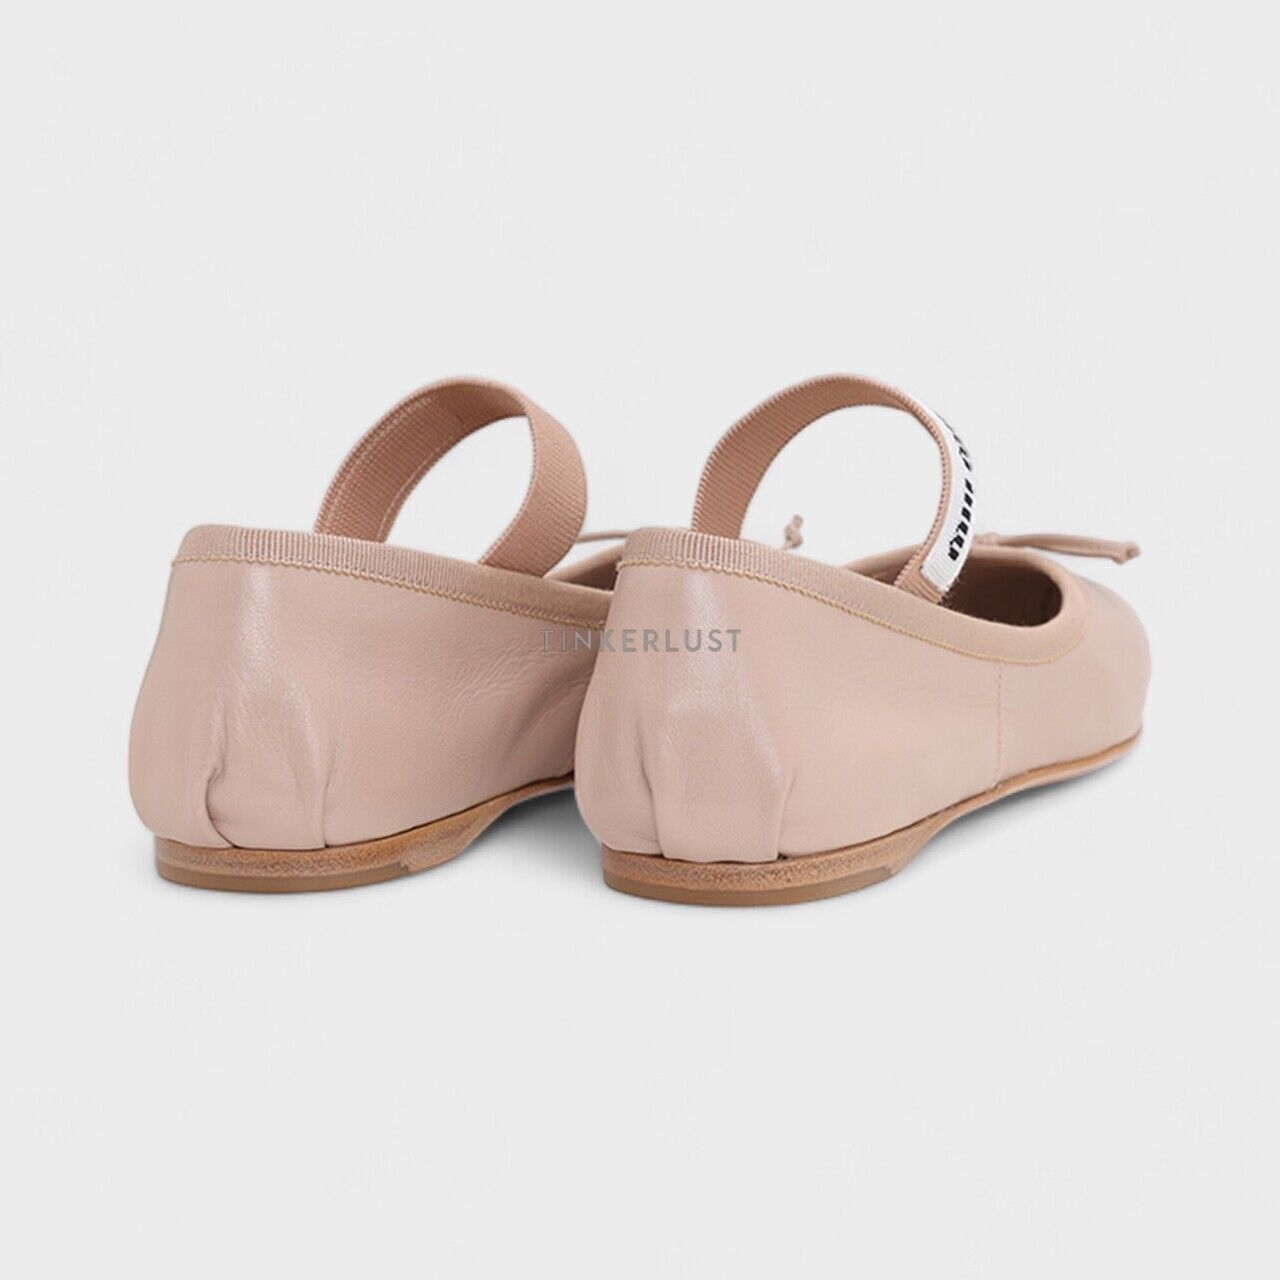 Miu Miu Bow Elastic Band Ballerina in Water Lily Leather with Logo